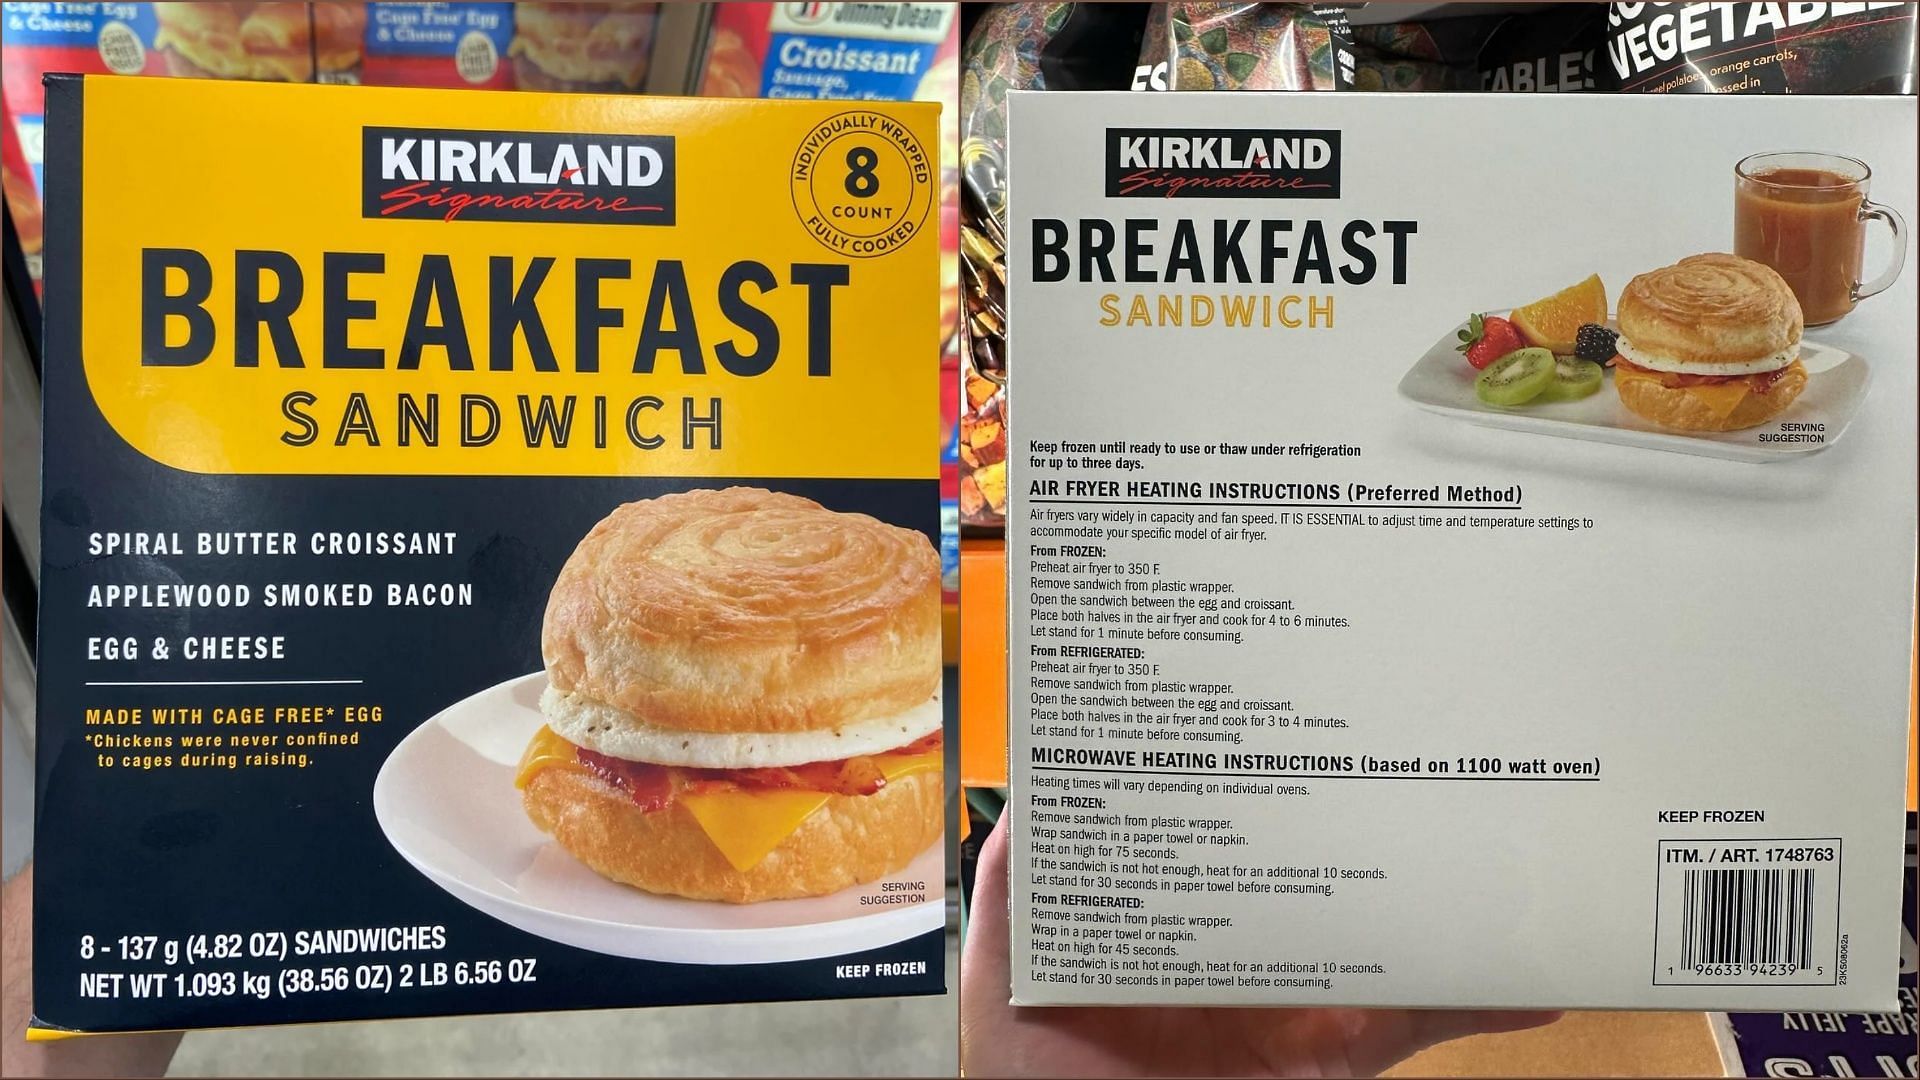 Costco introduces new Kirkland Signature Frozen Croissant Breakfast Sandwiches (Image via @whats_in_your_cart / Instagram) 